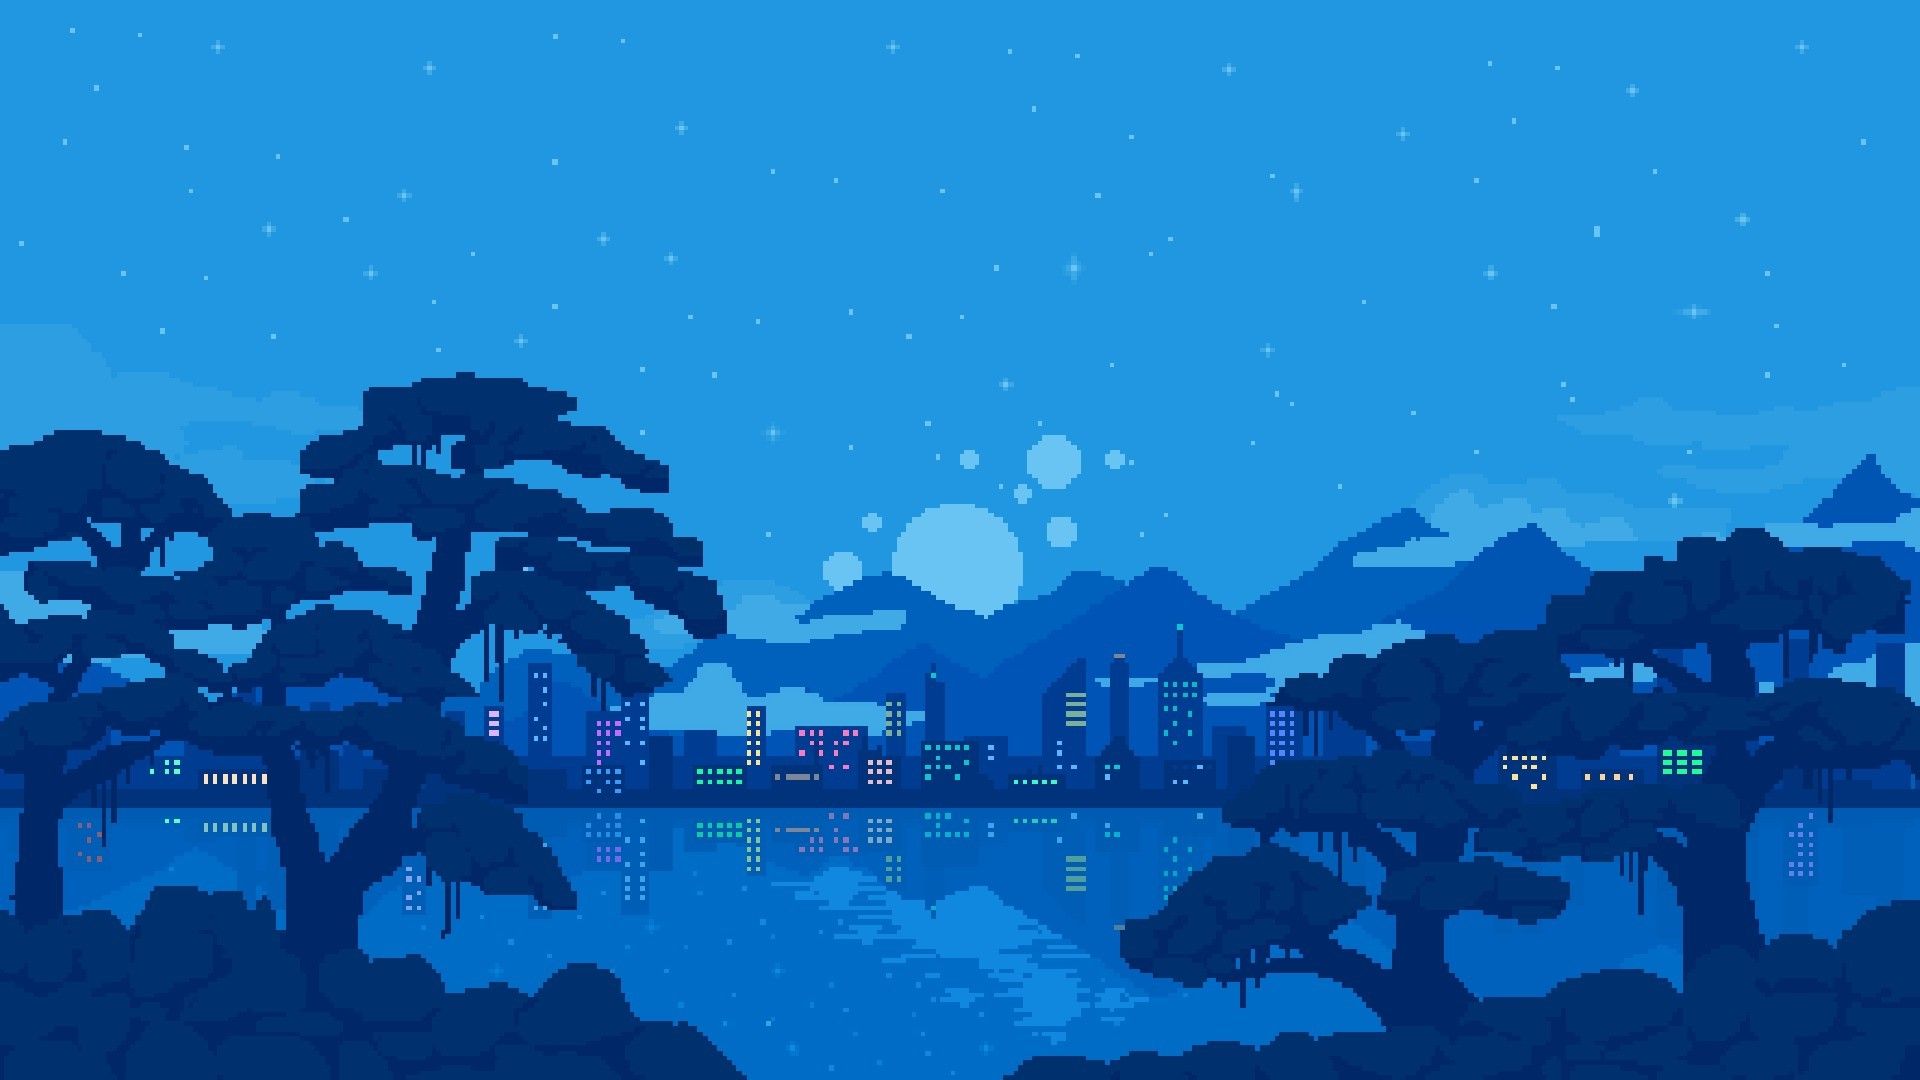 A city skyline at night with trees and water - Pixel art